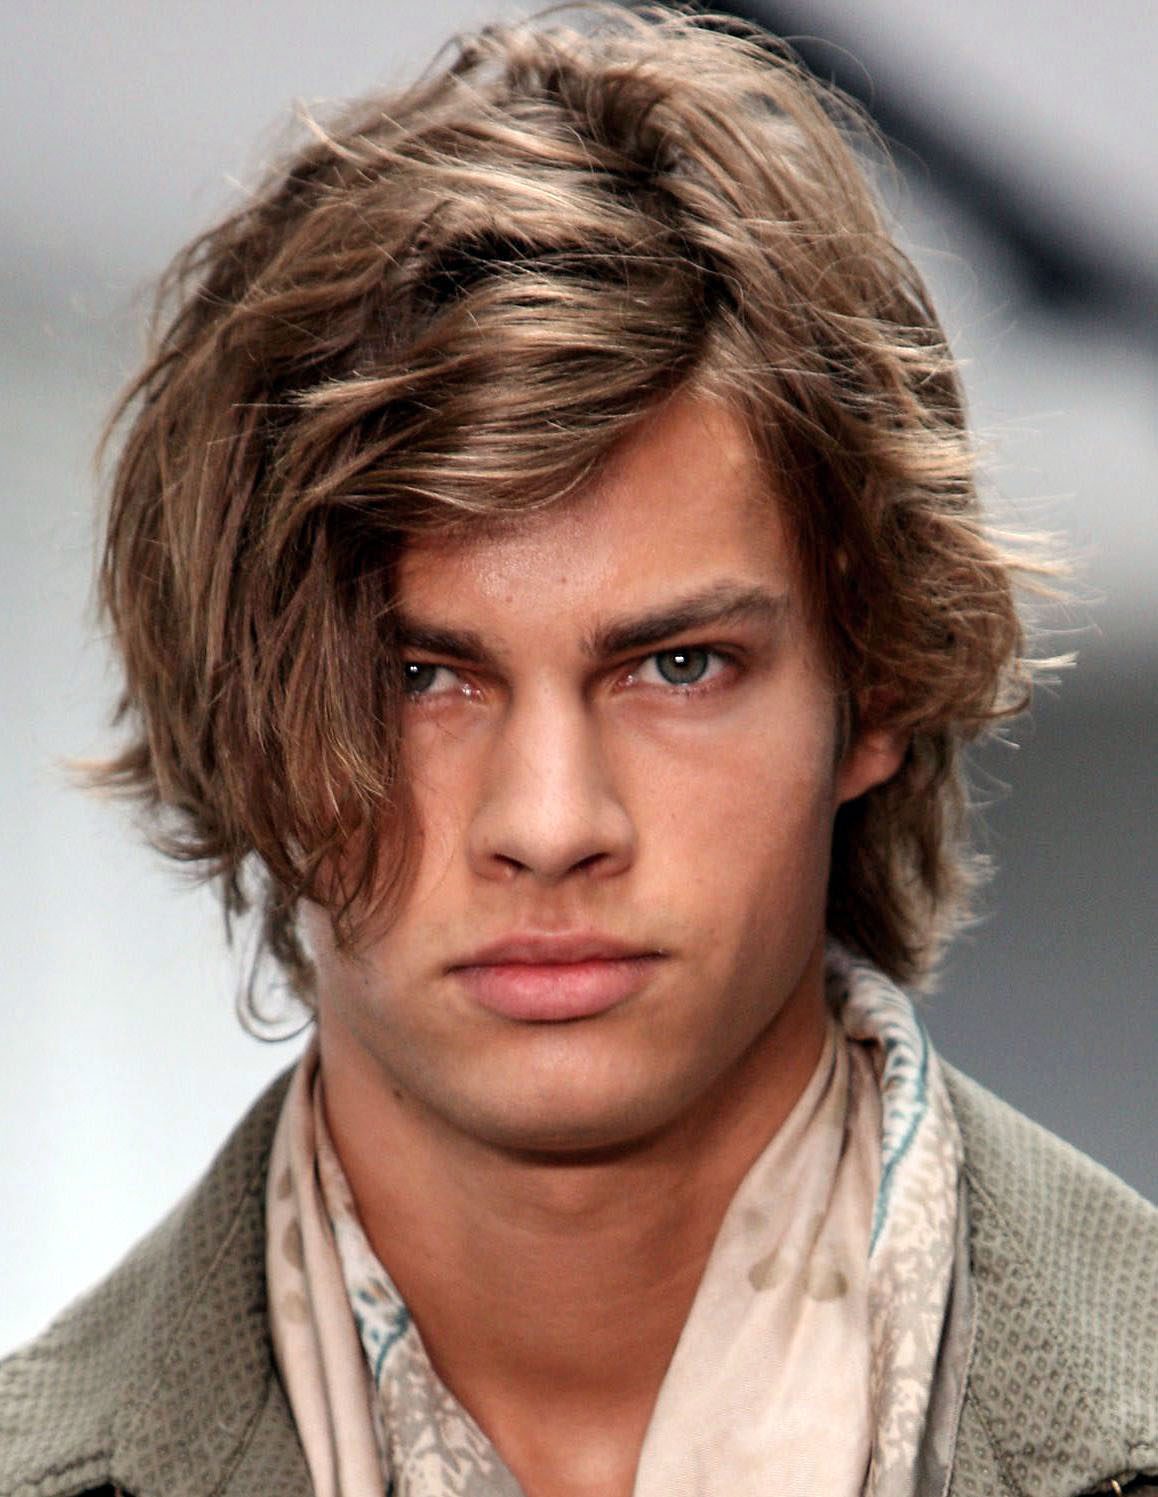 Best Hairstyles for Men with Round Faces | All Things Hair